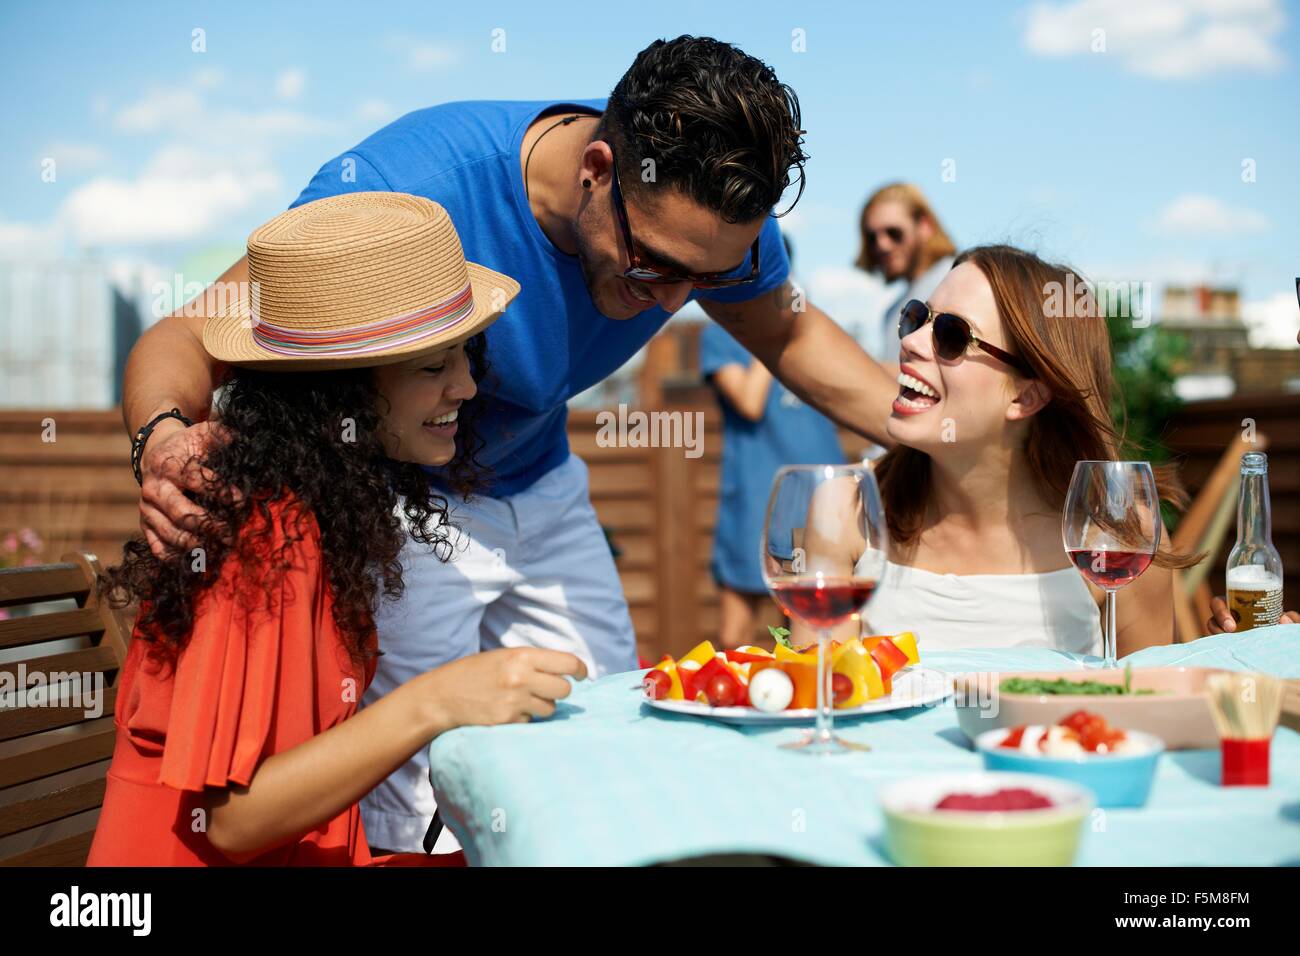 Male and female friends chatting at rooftop barbecue Stock Photo